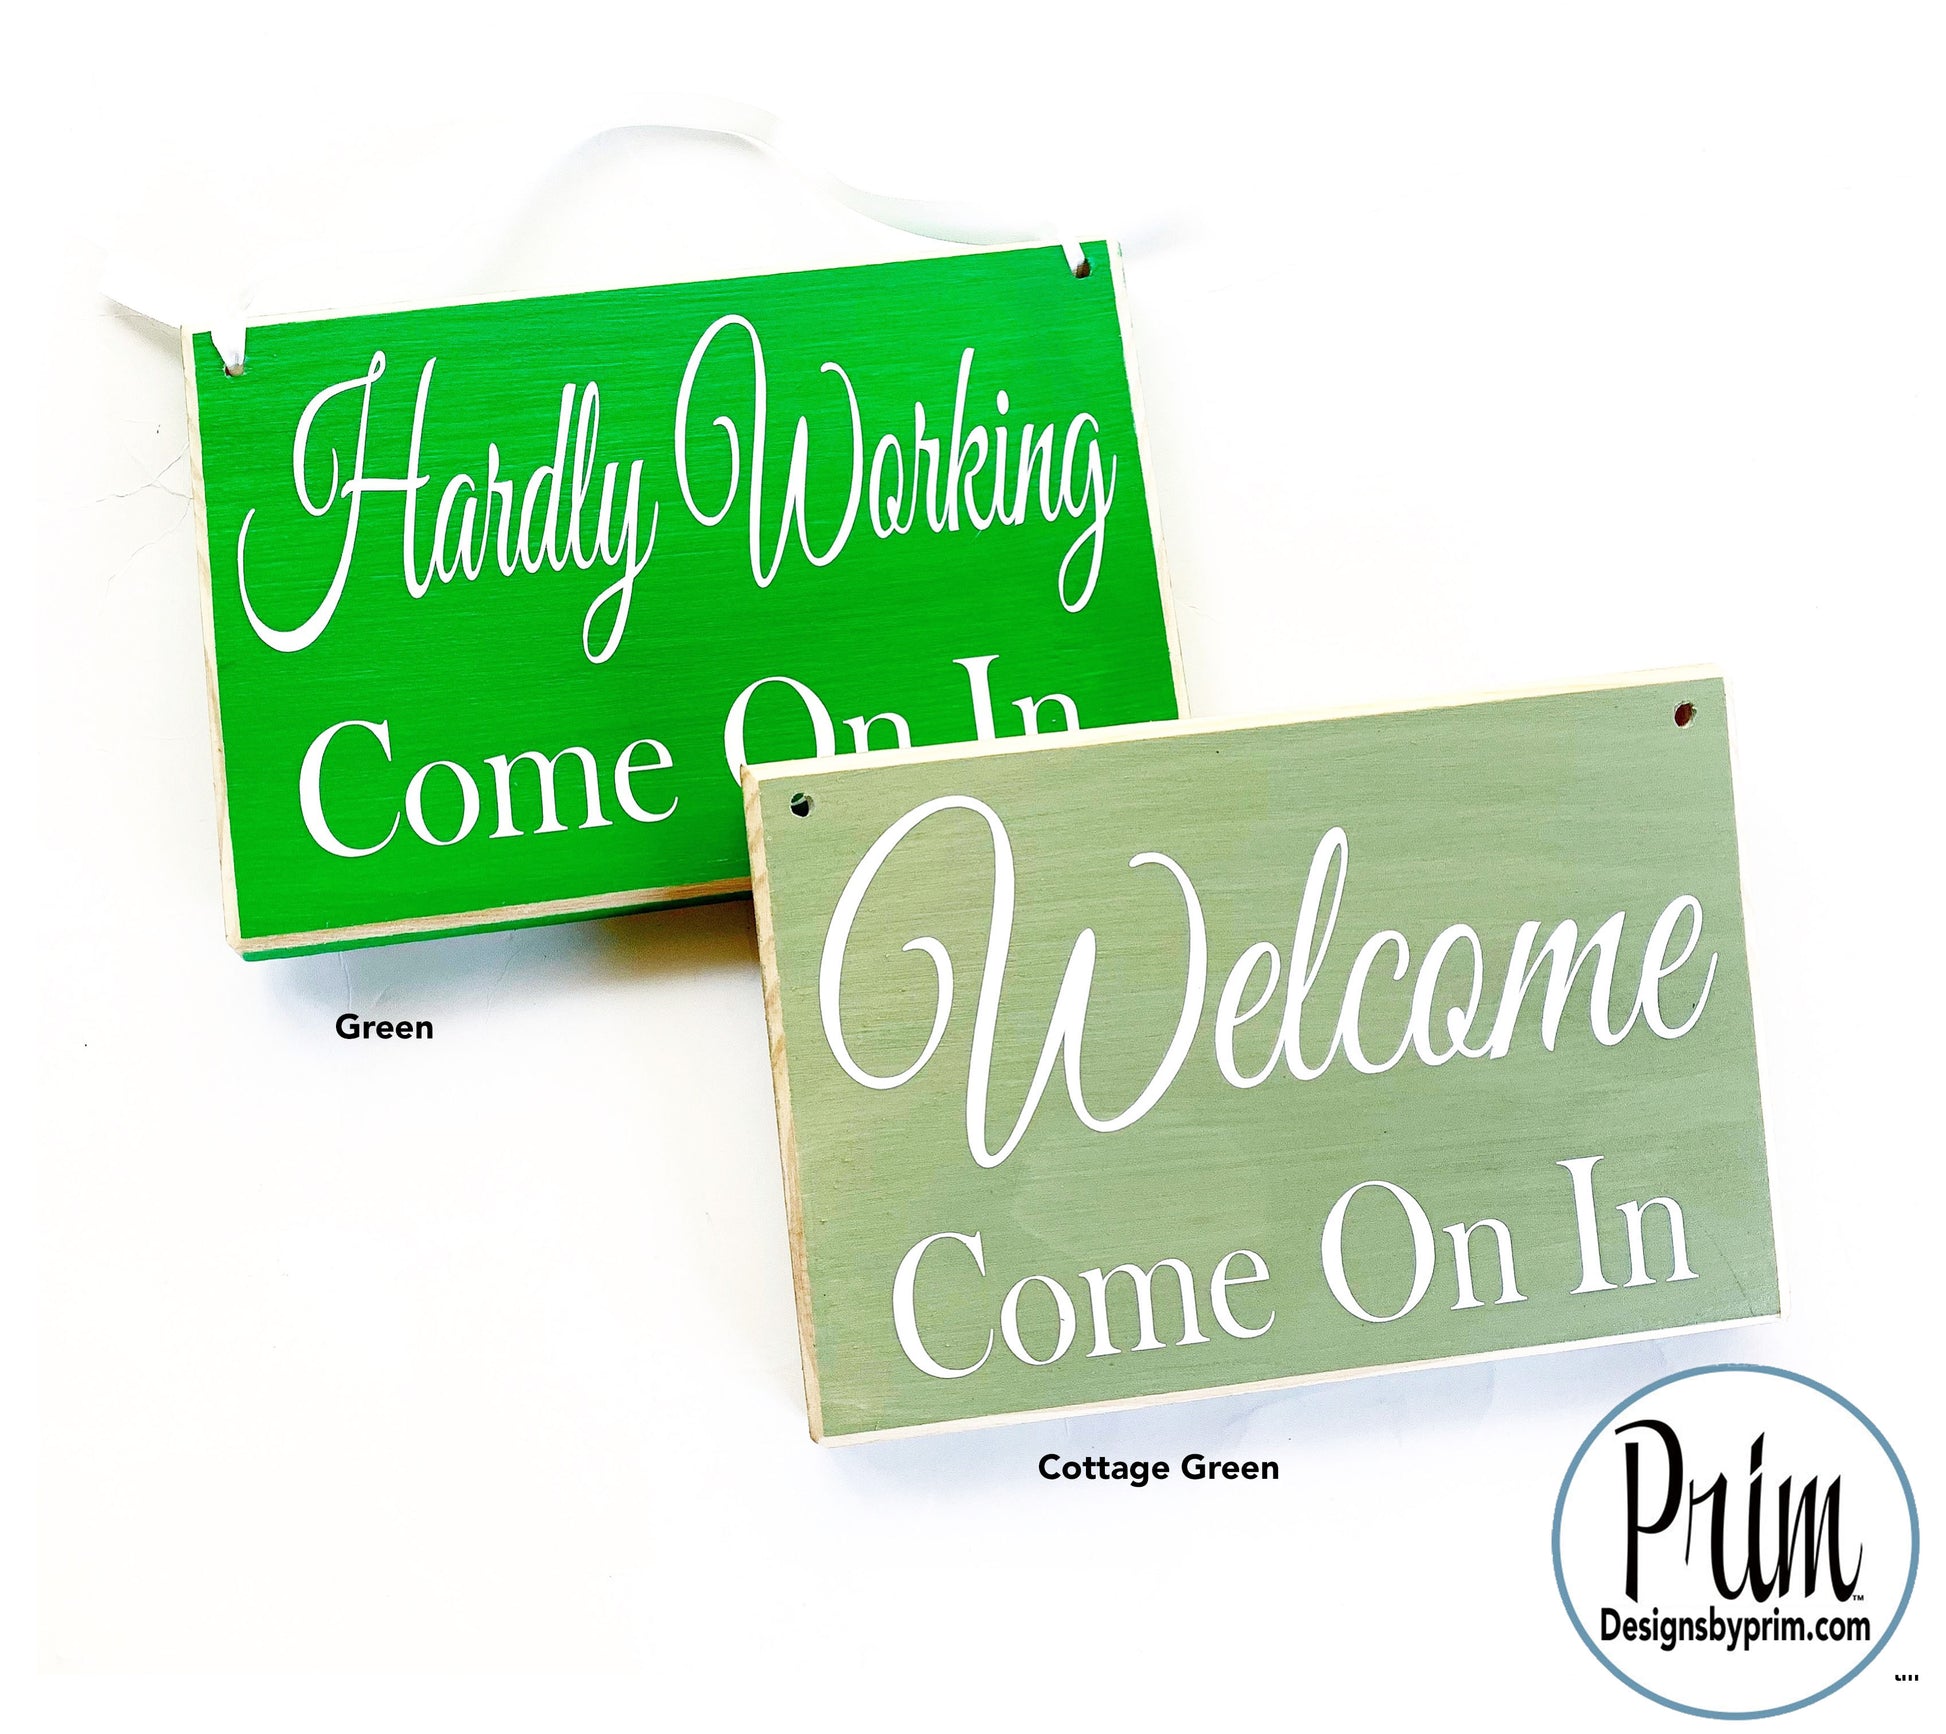 Designs by Prim 14x8 Families are Forever Custom Wood Sign | Home is where my Family Is Home Sweet Home Wall Decor Hanger Door Plaque